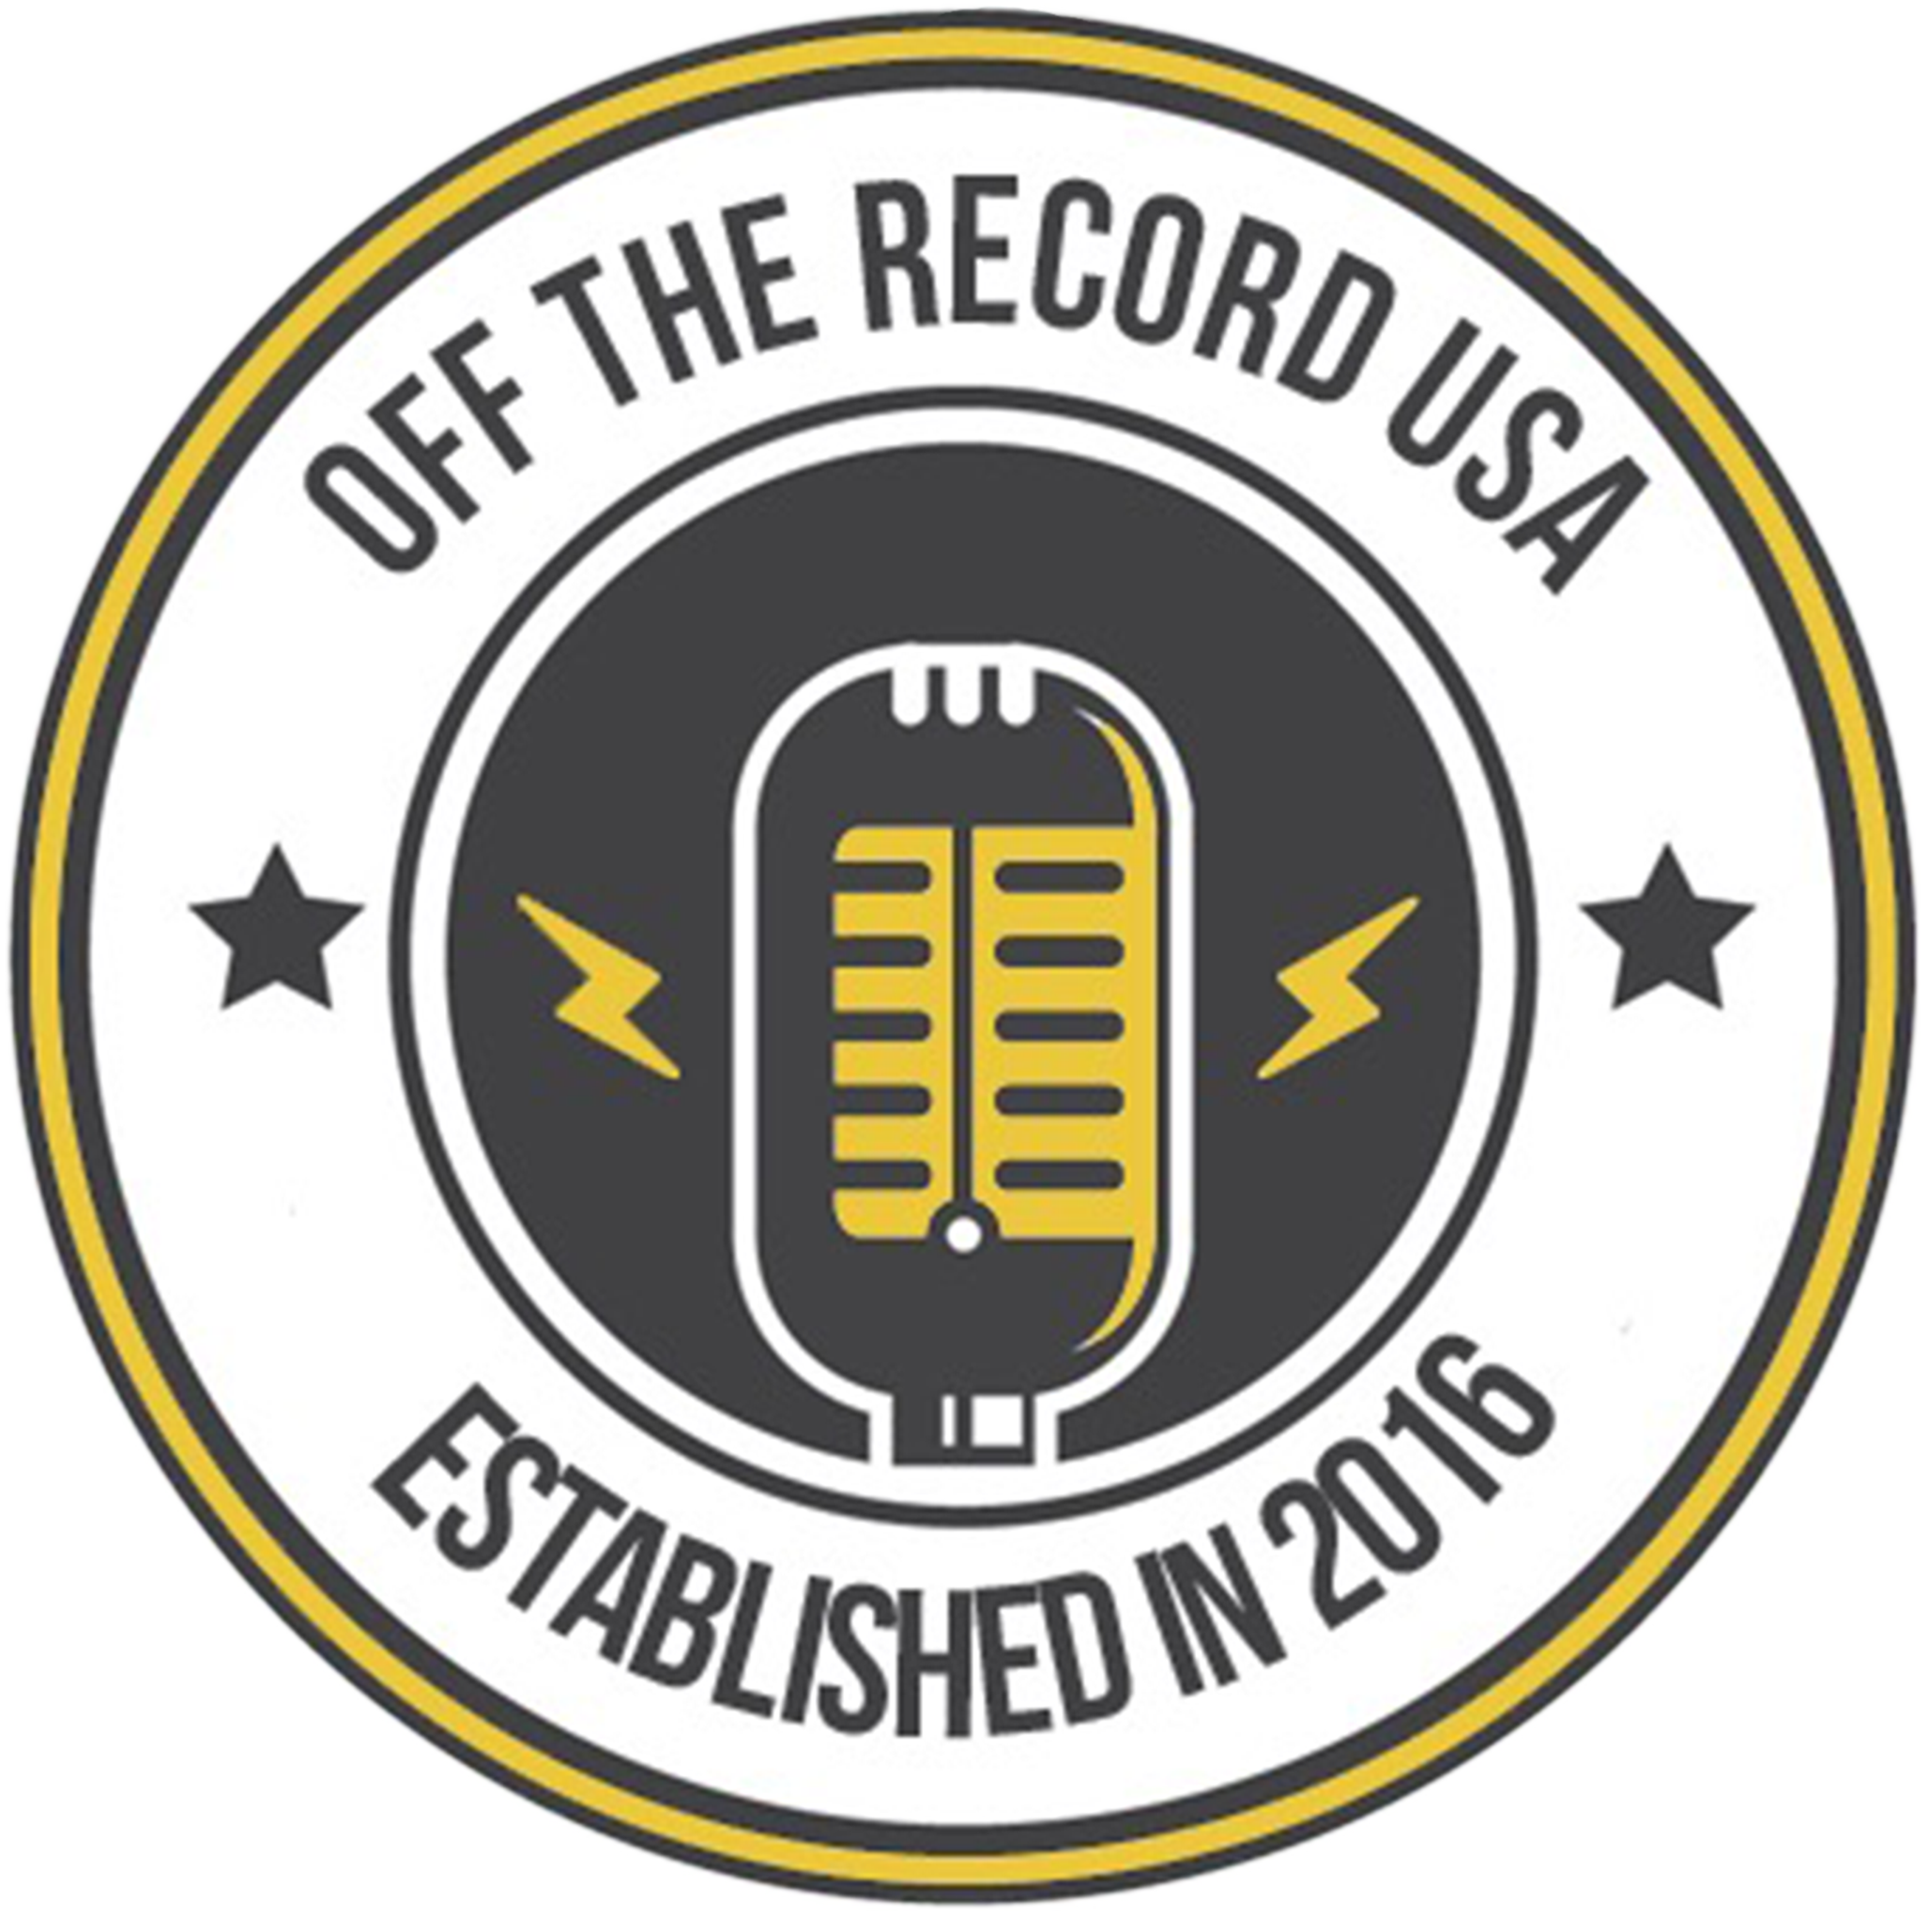 Off The Record USA